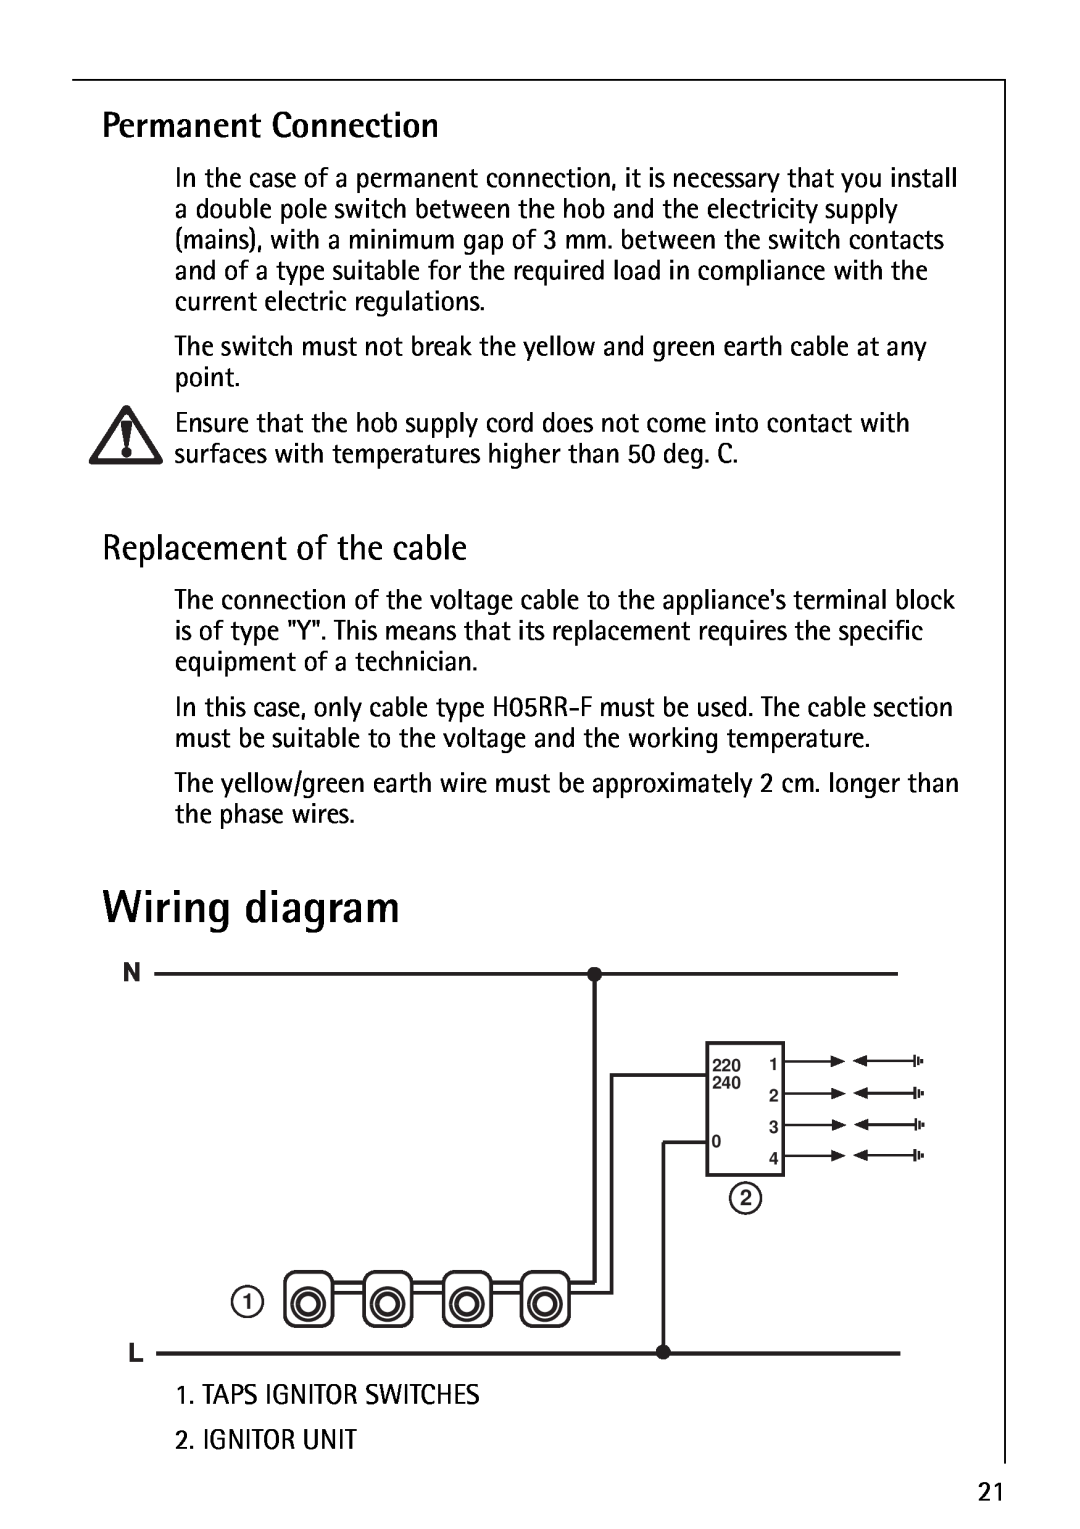 AEG 35610C, 35601G, 35600G, 34611C, 34602G, 35604G Wiring diagram, Permanent Connection, Replacement of the cable 